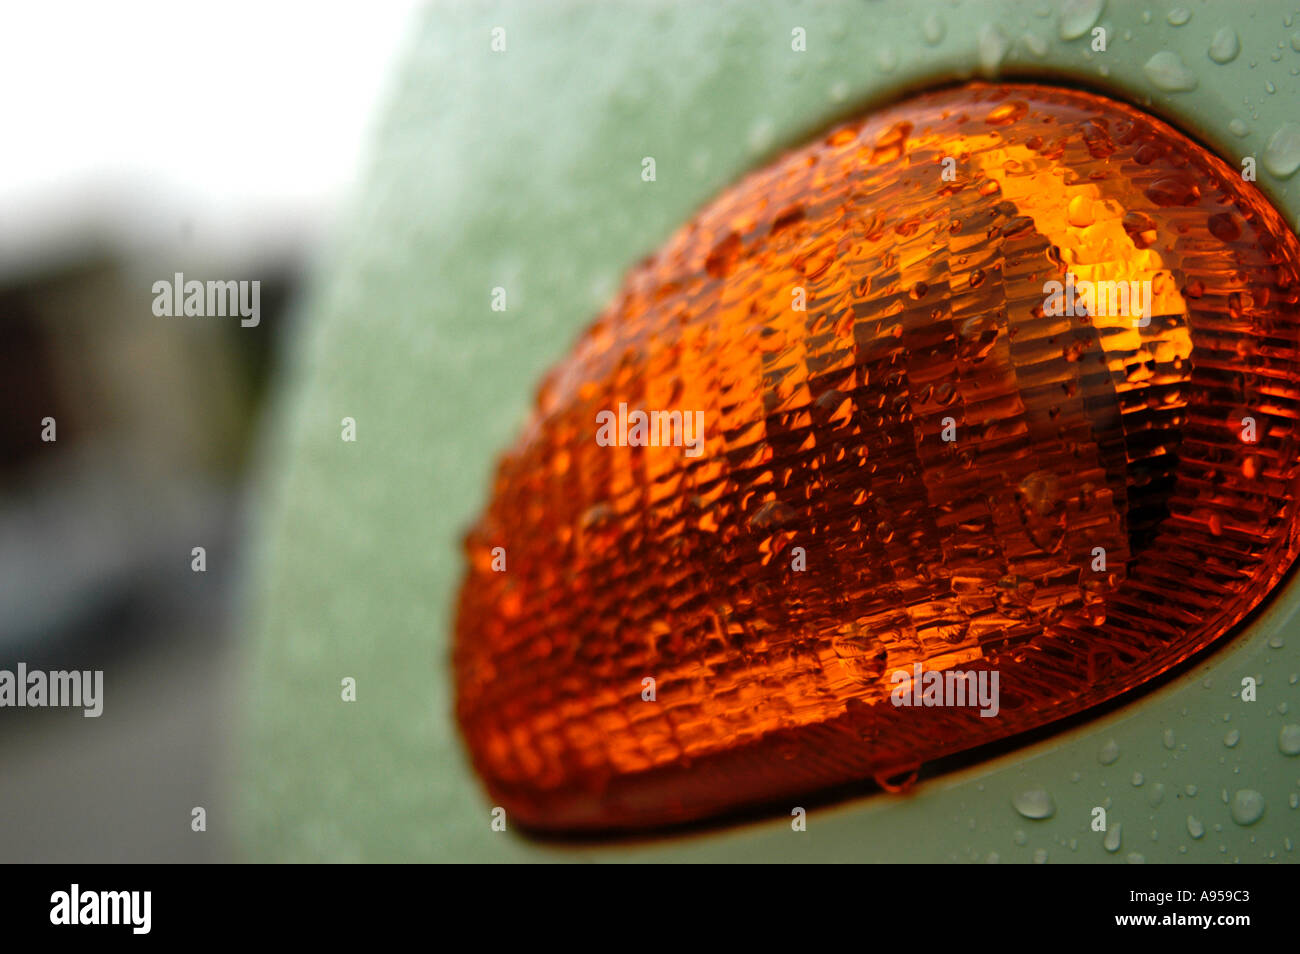 Detail of indicator light cluster on wet Vespa moped scooter, made by Piaggio. Shot in the pouring rain. Stock Photo